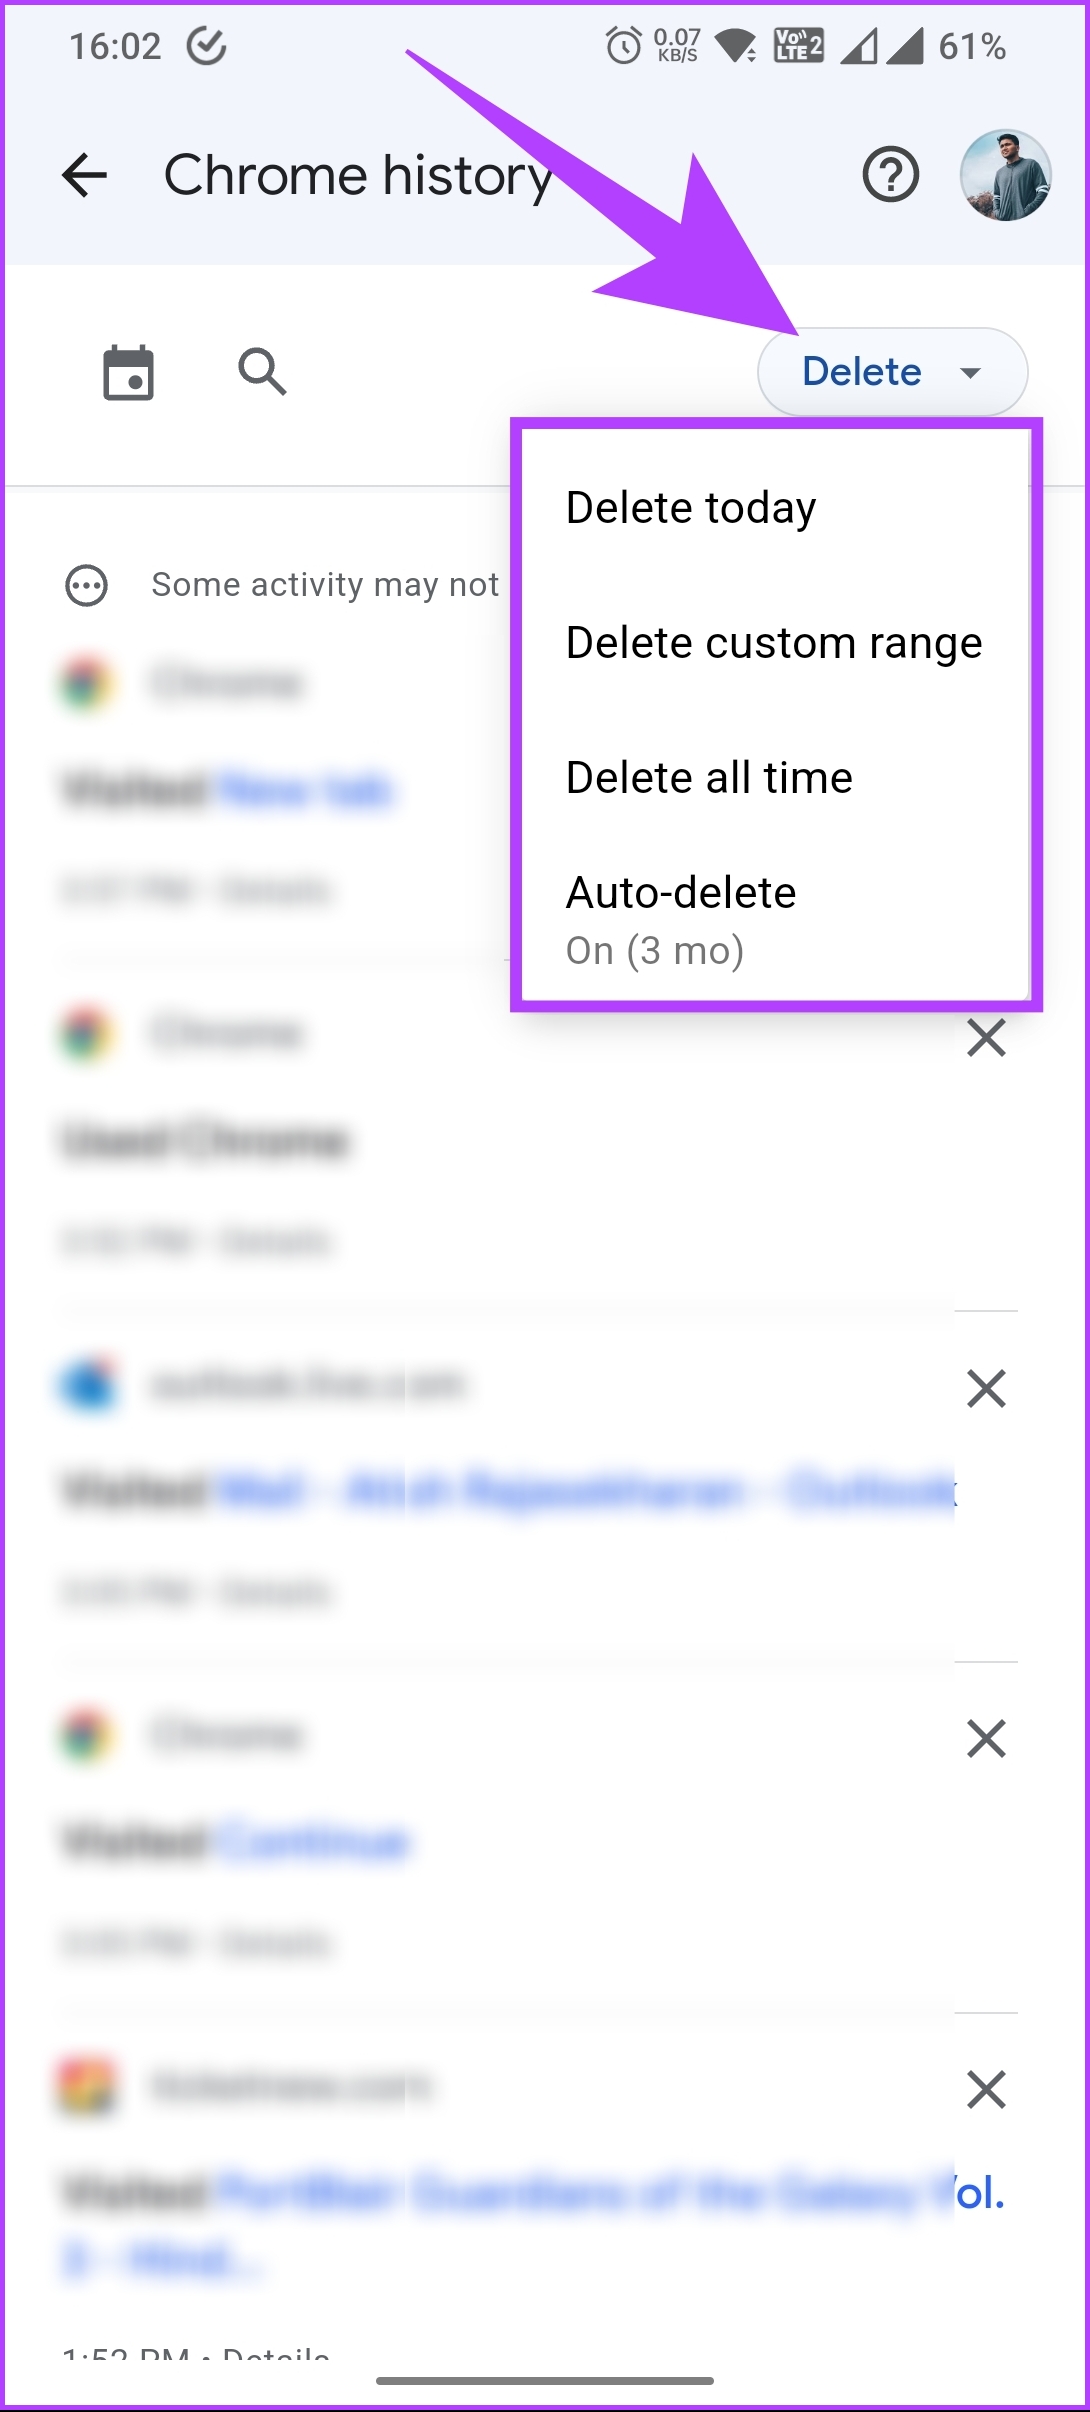 click the delete button, and select the time frame